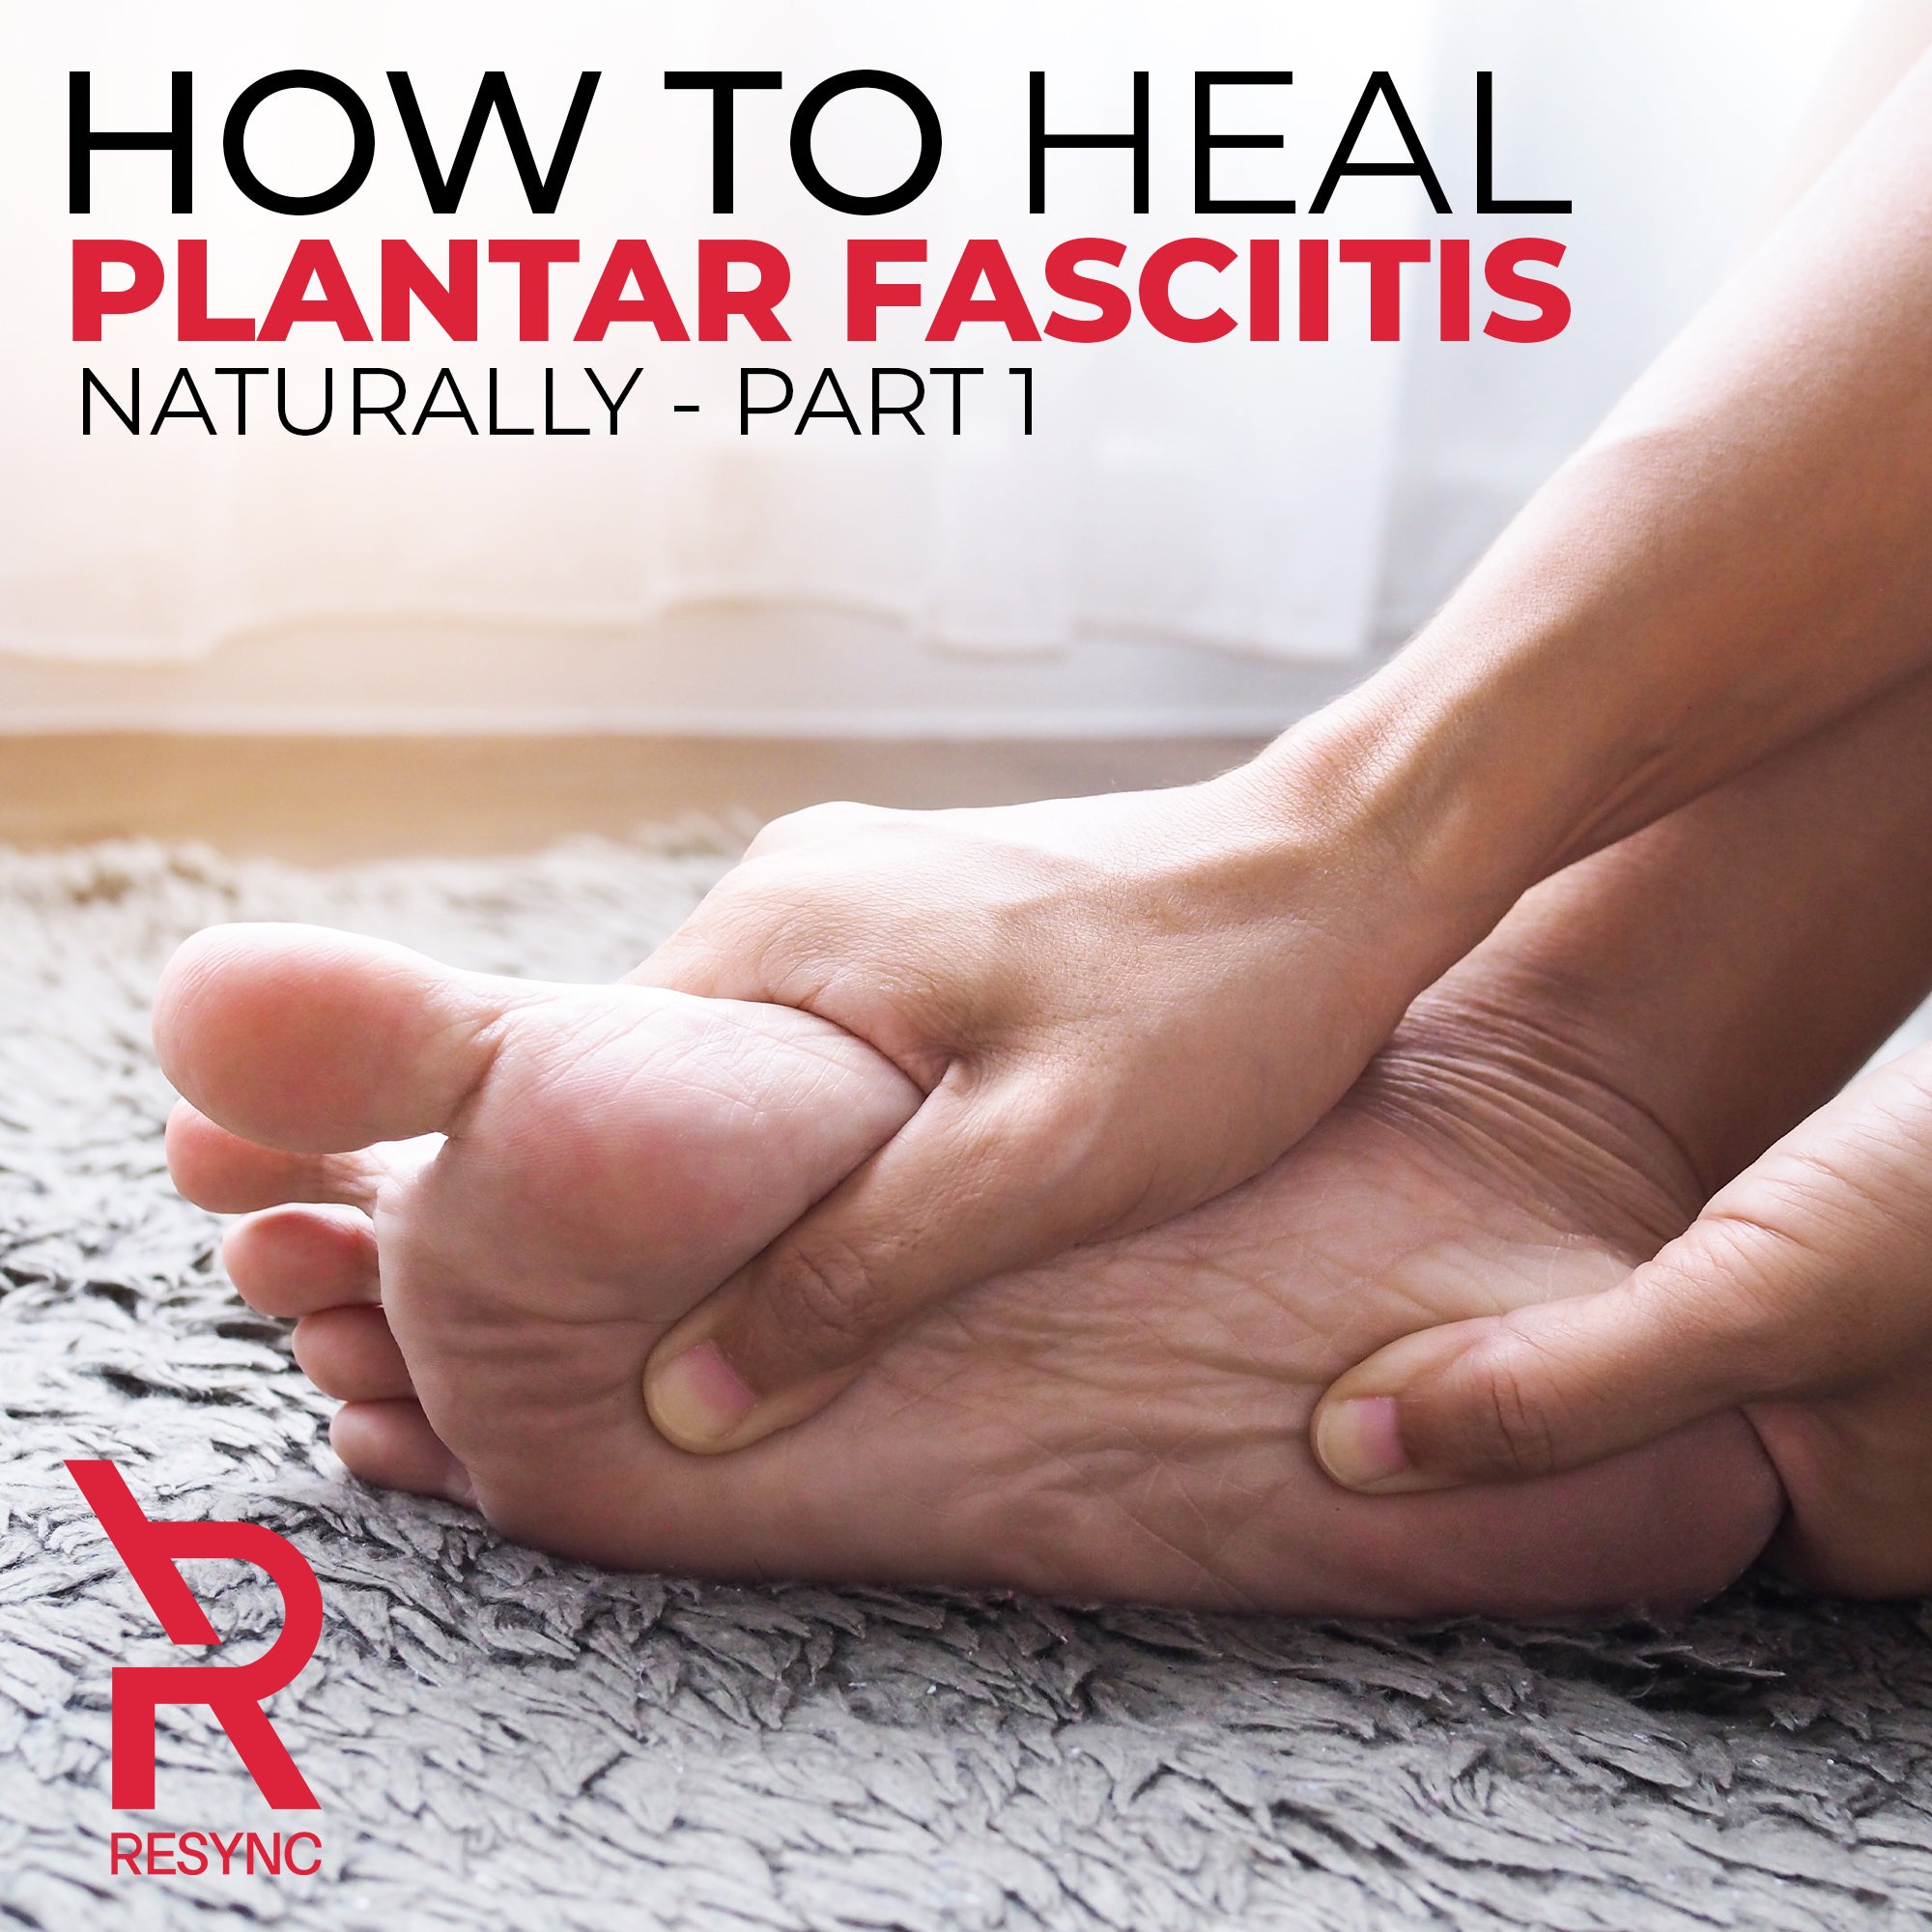 How To Heal Plantar Fasciitis Naturally - Part 1